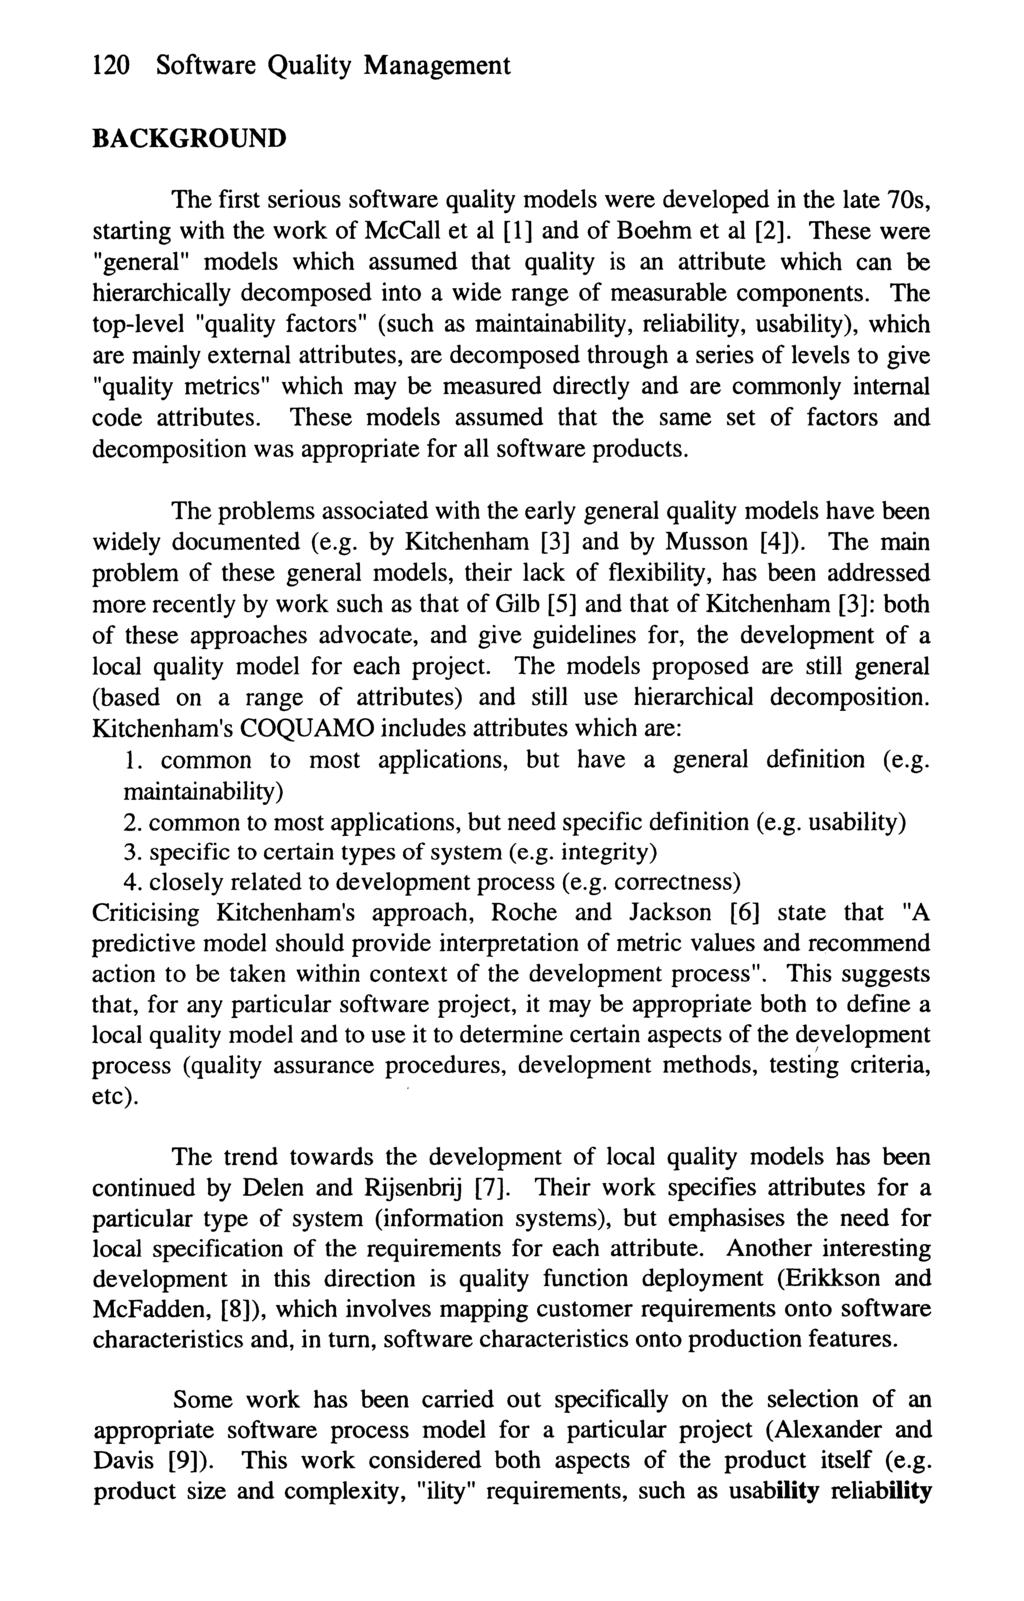 120 Software Quality Management BACKGROUND The first serious software quality models were developed in the late 70s, starting with the work of McCall et al [1] and of Boehm et al [2].